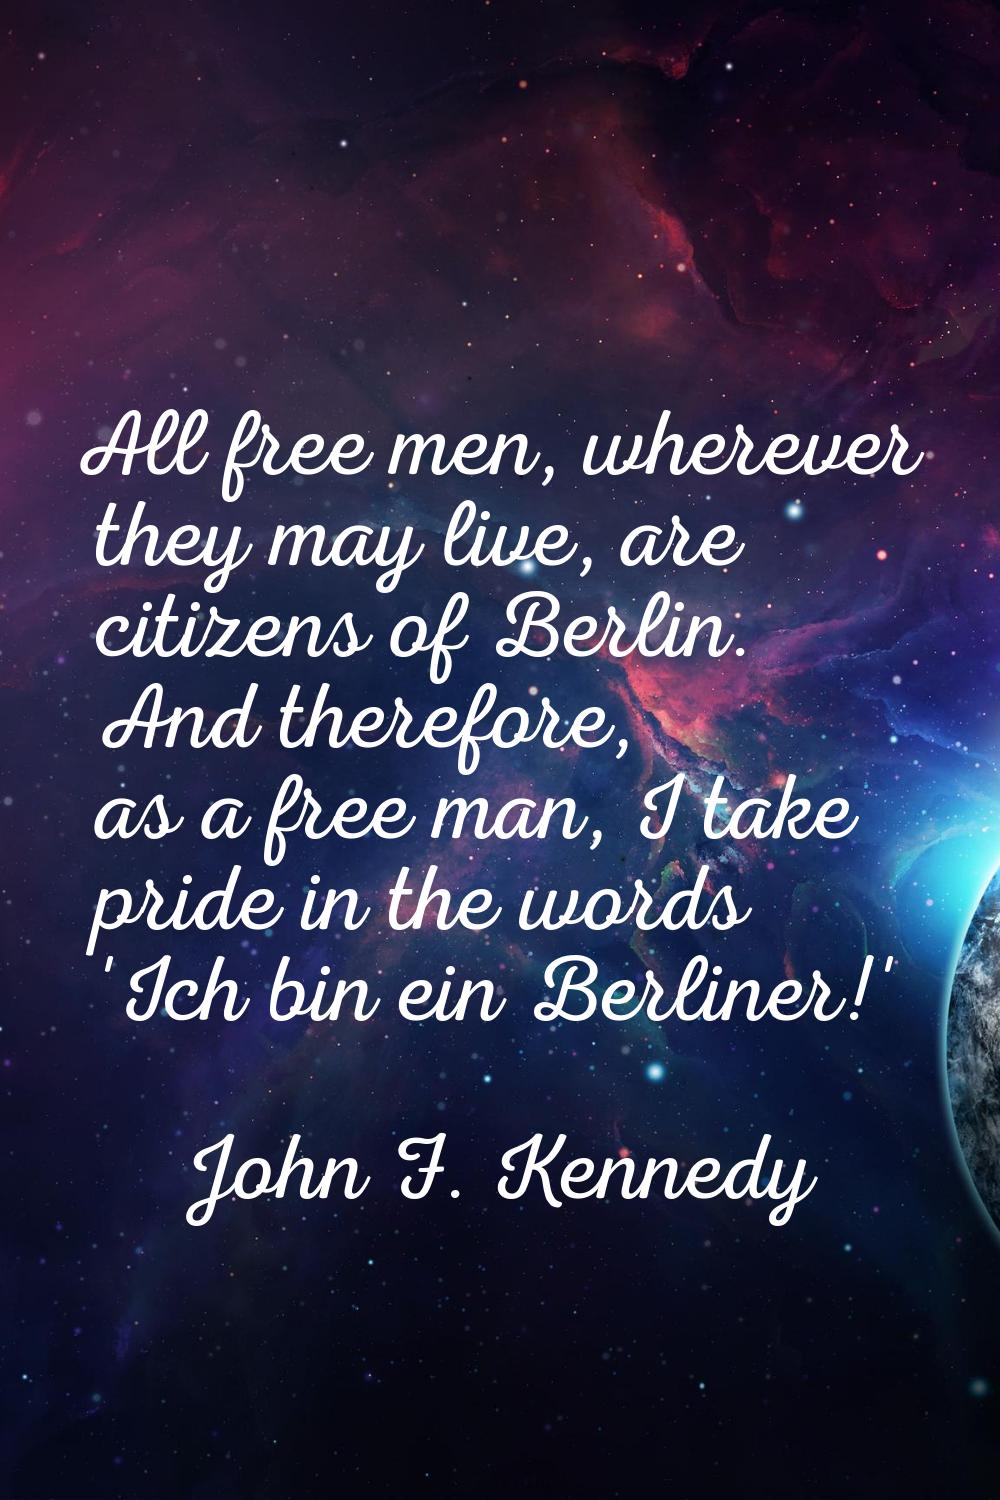 All free men, wherever they may live, are citizens of Berlin. And therefore, as a free man, I take 